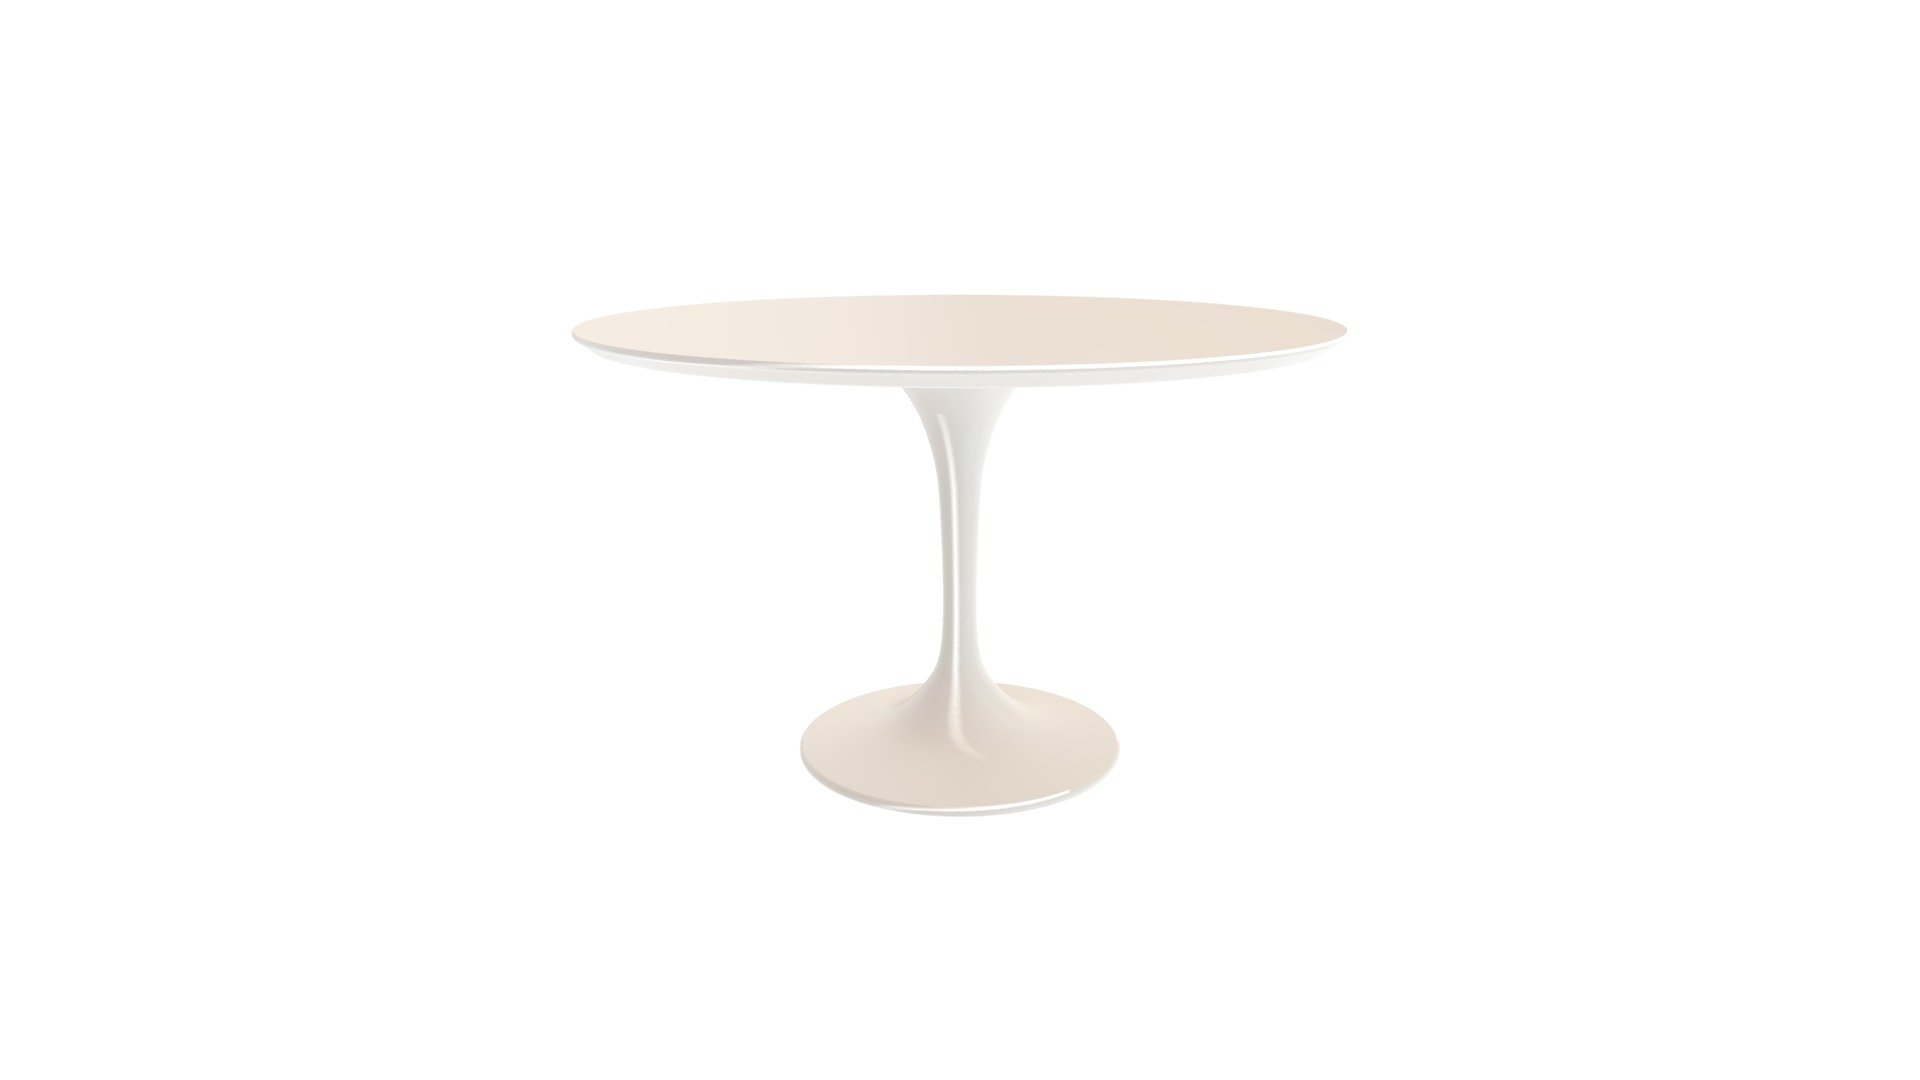 https://zuomod.com/wilco-table-white

The Wilco table echoes some of the great Mid-century design with its tulip base and bevel edge round top. Its top is glossy painted MDF and its base is glossy coated fiberglass 3d model